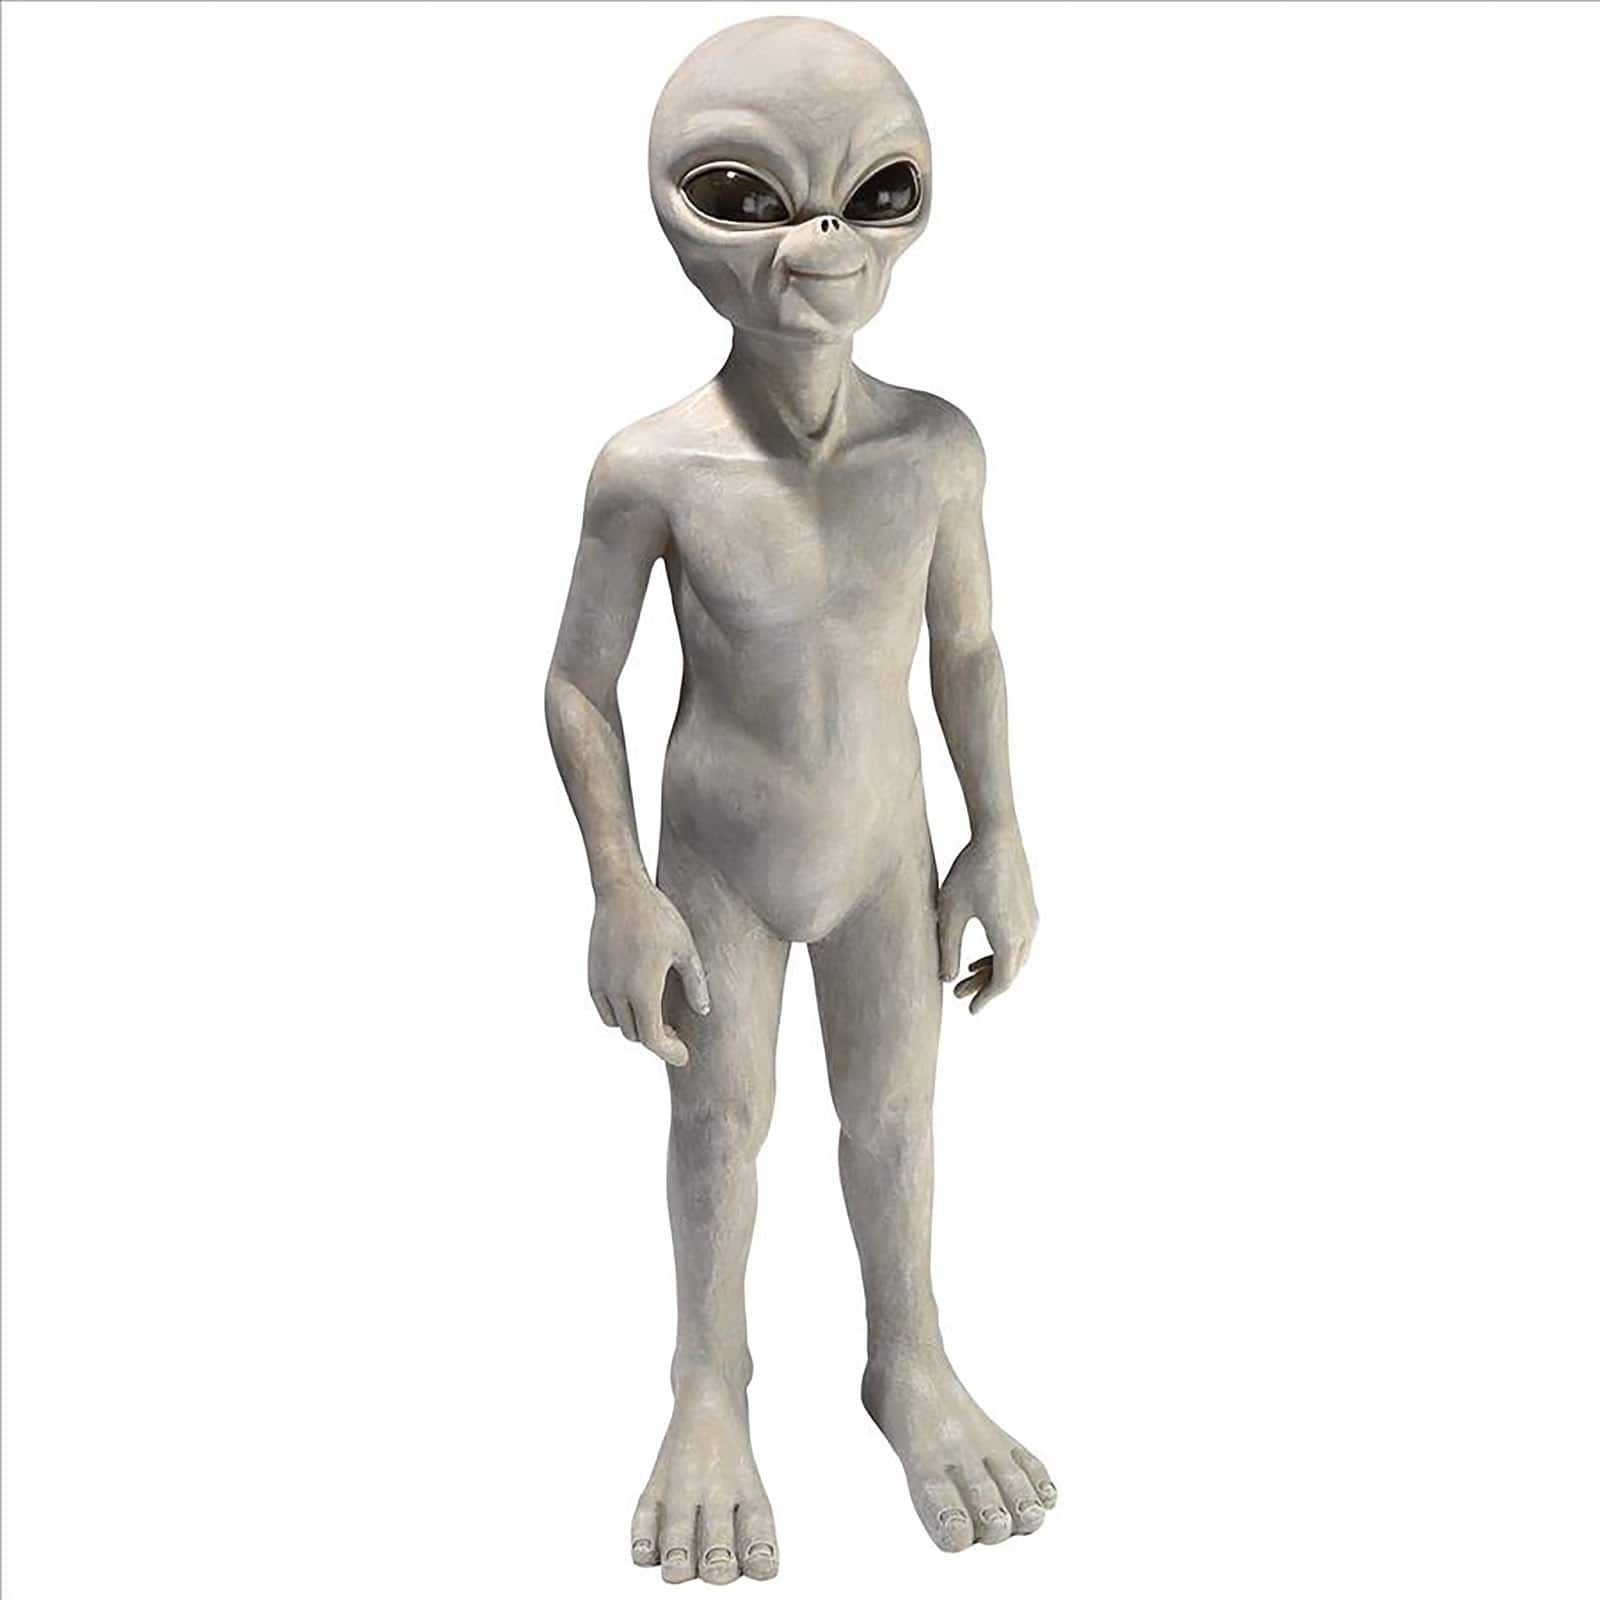 Design Toscano Medium The Out-of-this-World Alien Extra Terrestrial Statue